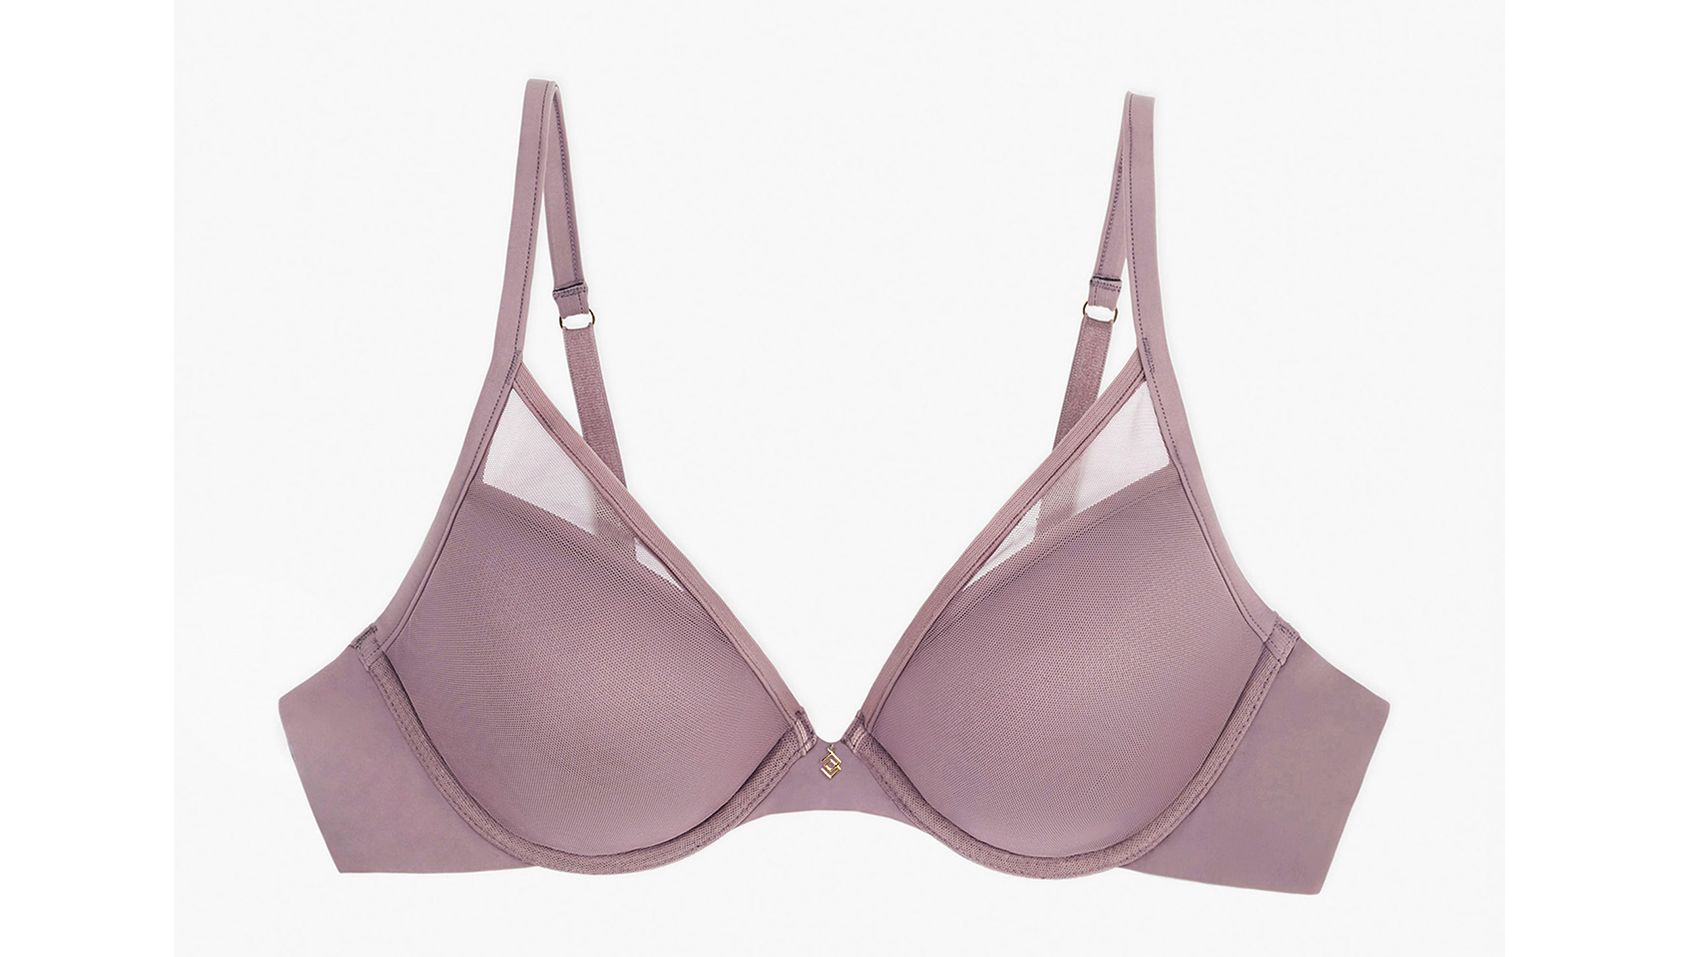 Third Love Classic Unlined Full Coverage Bra Size 44D - $19 - From